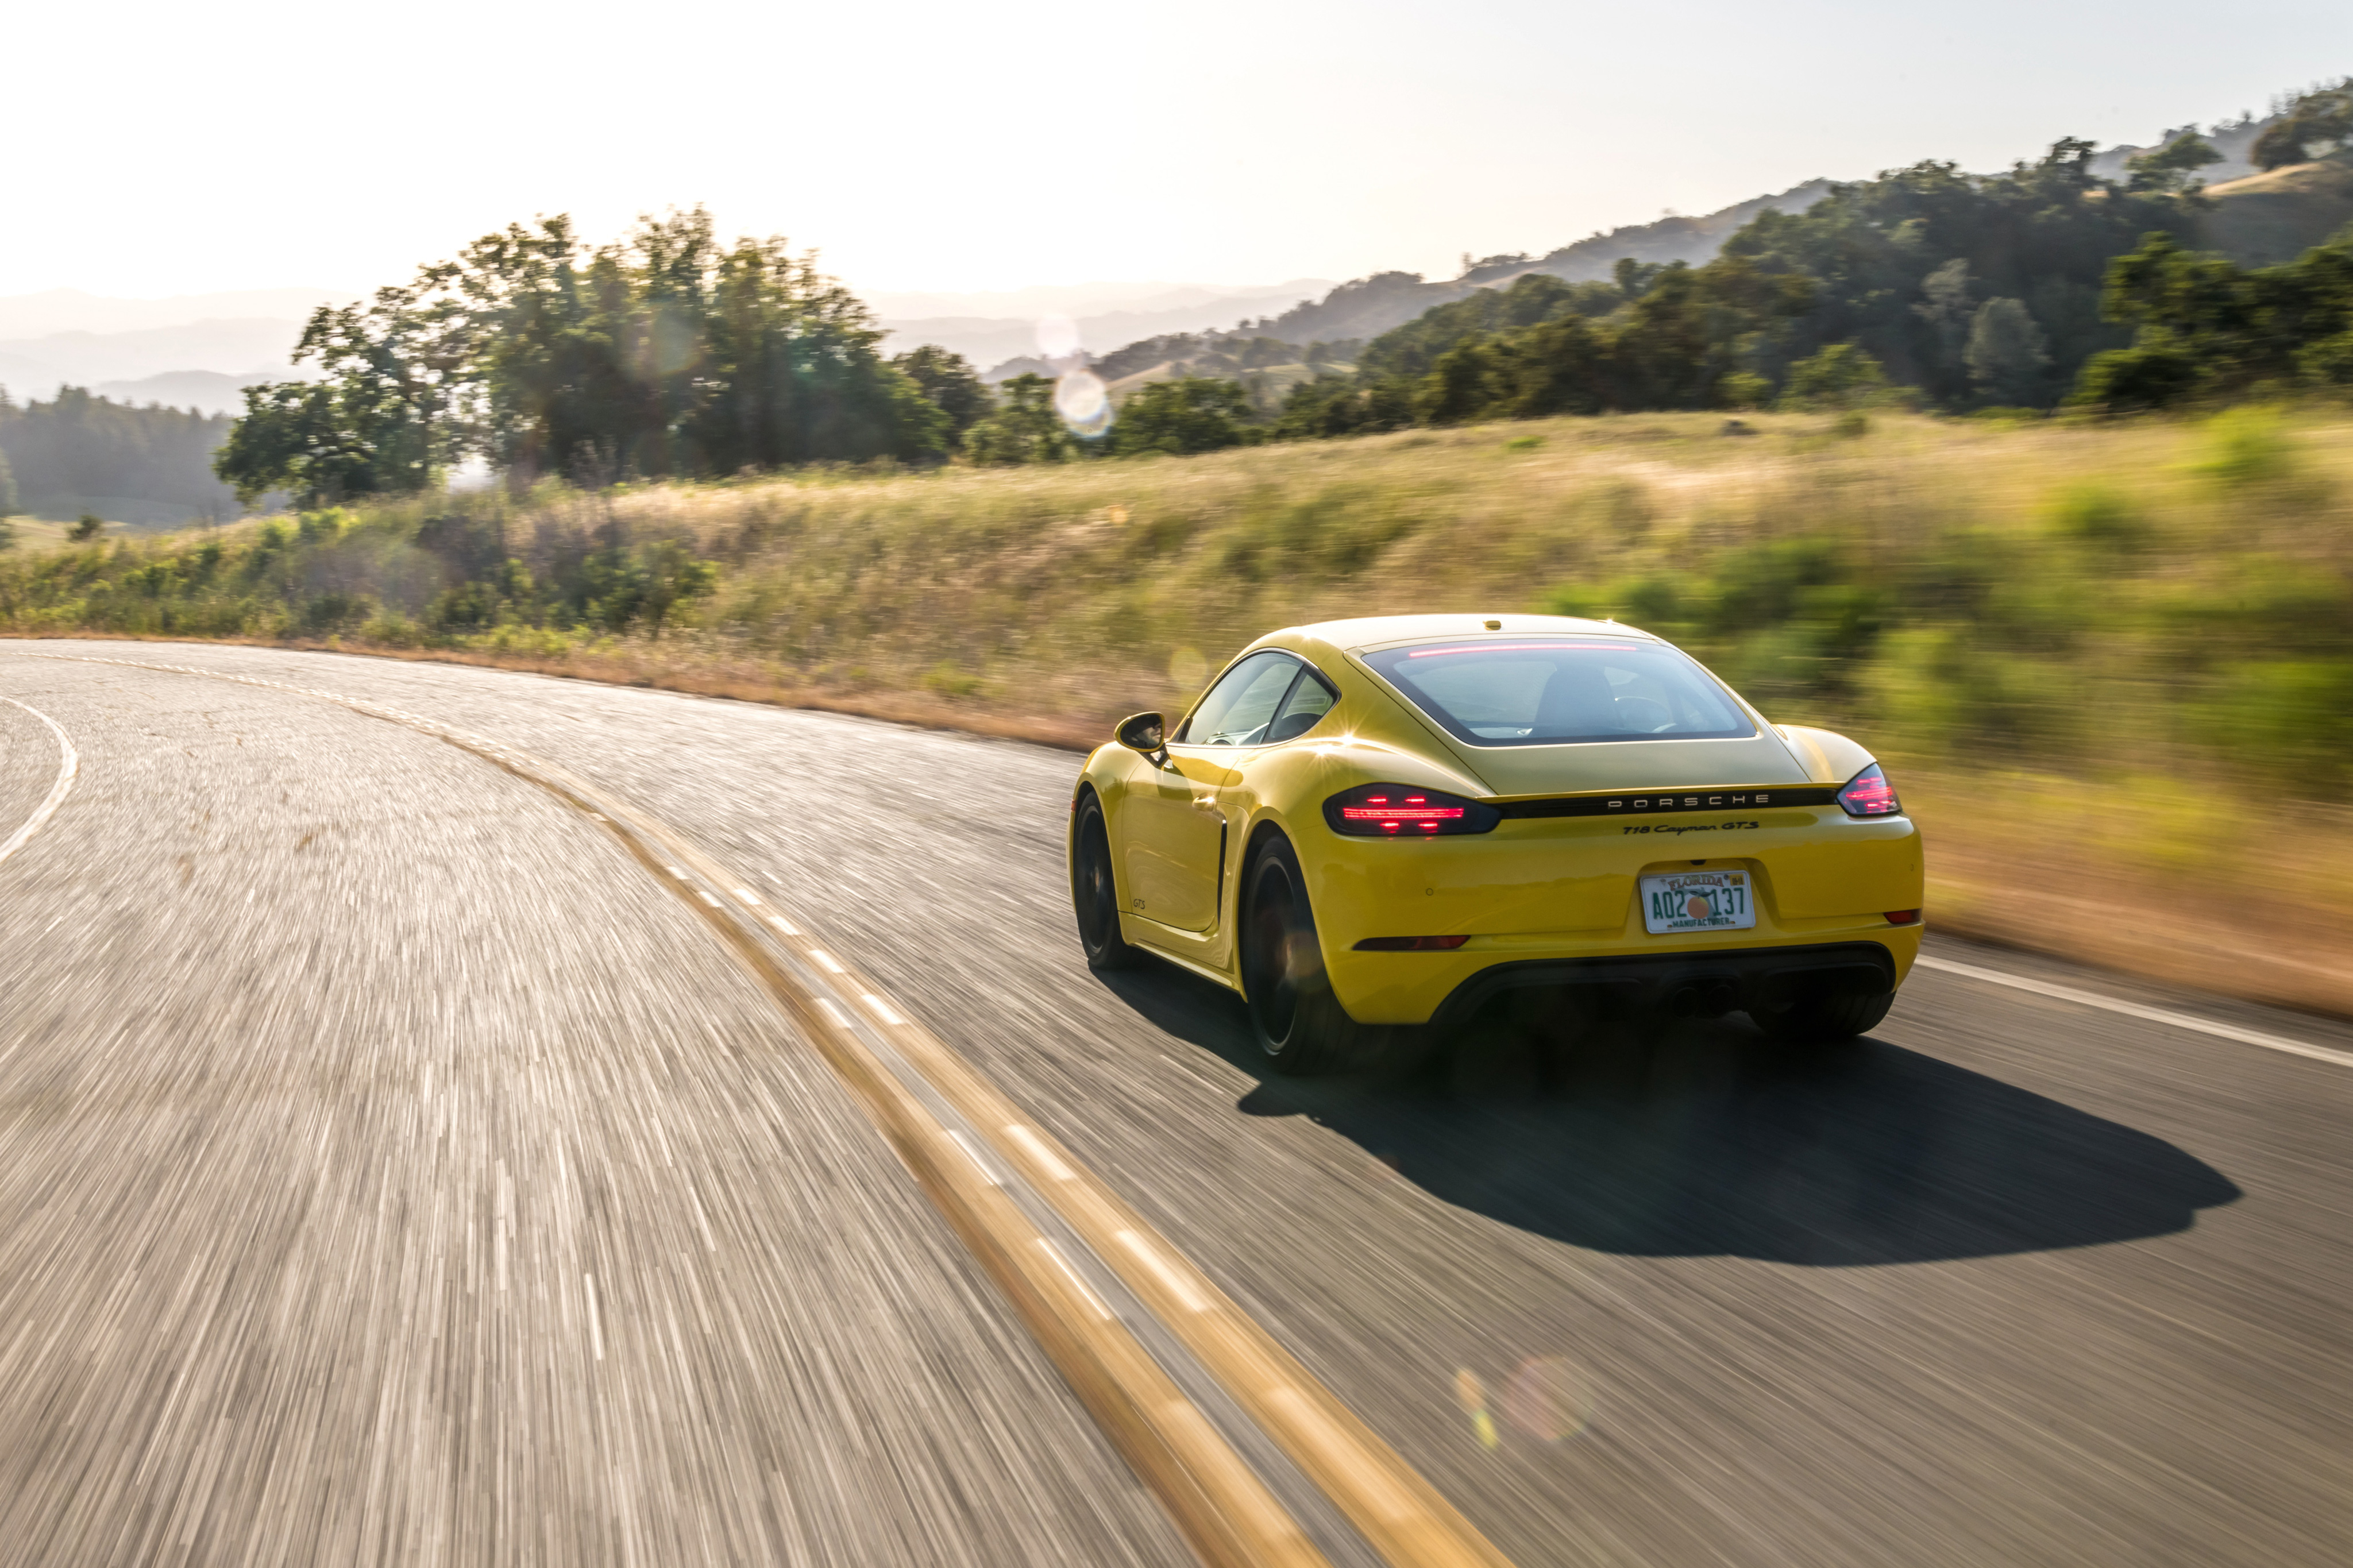 Yellow Porsche 718 driving on a paved road